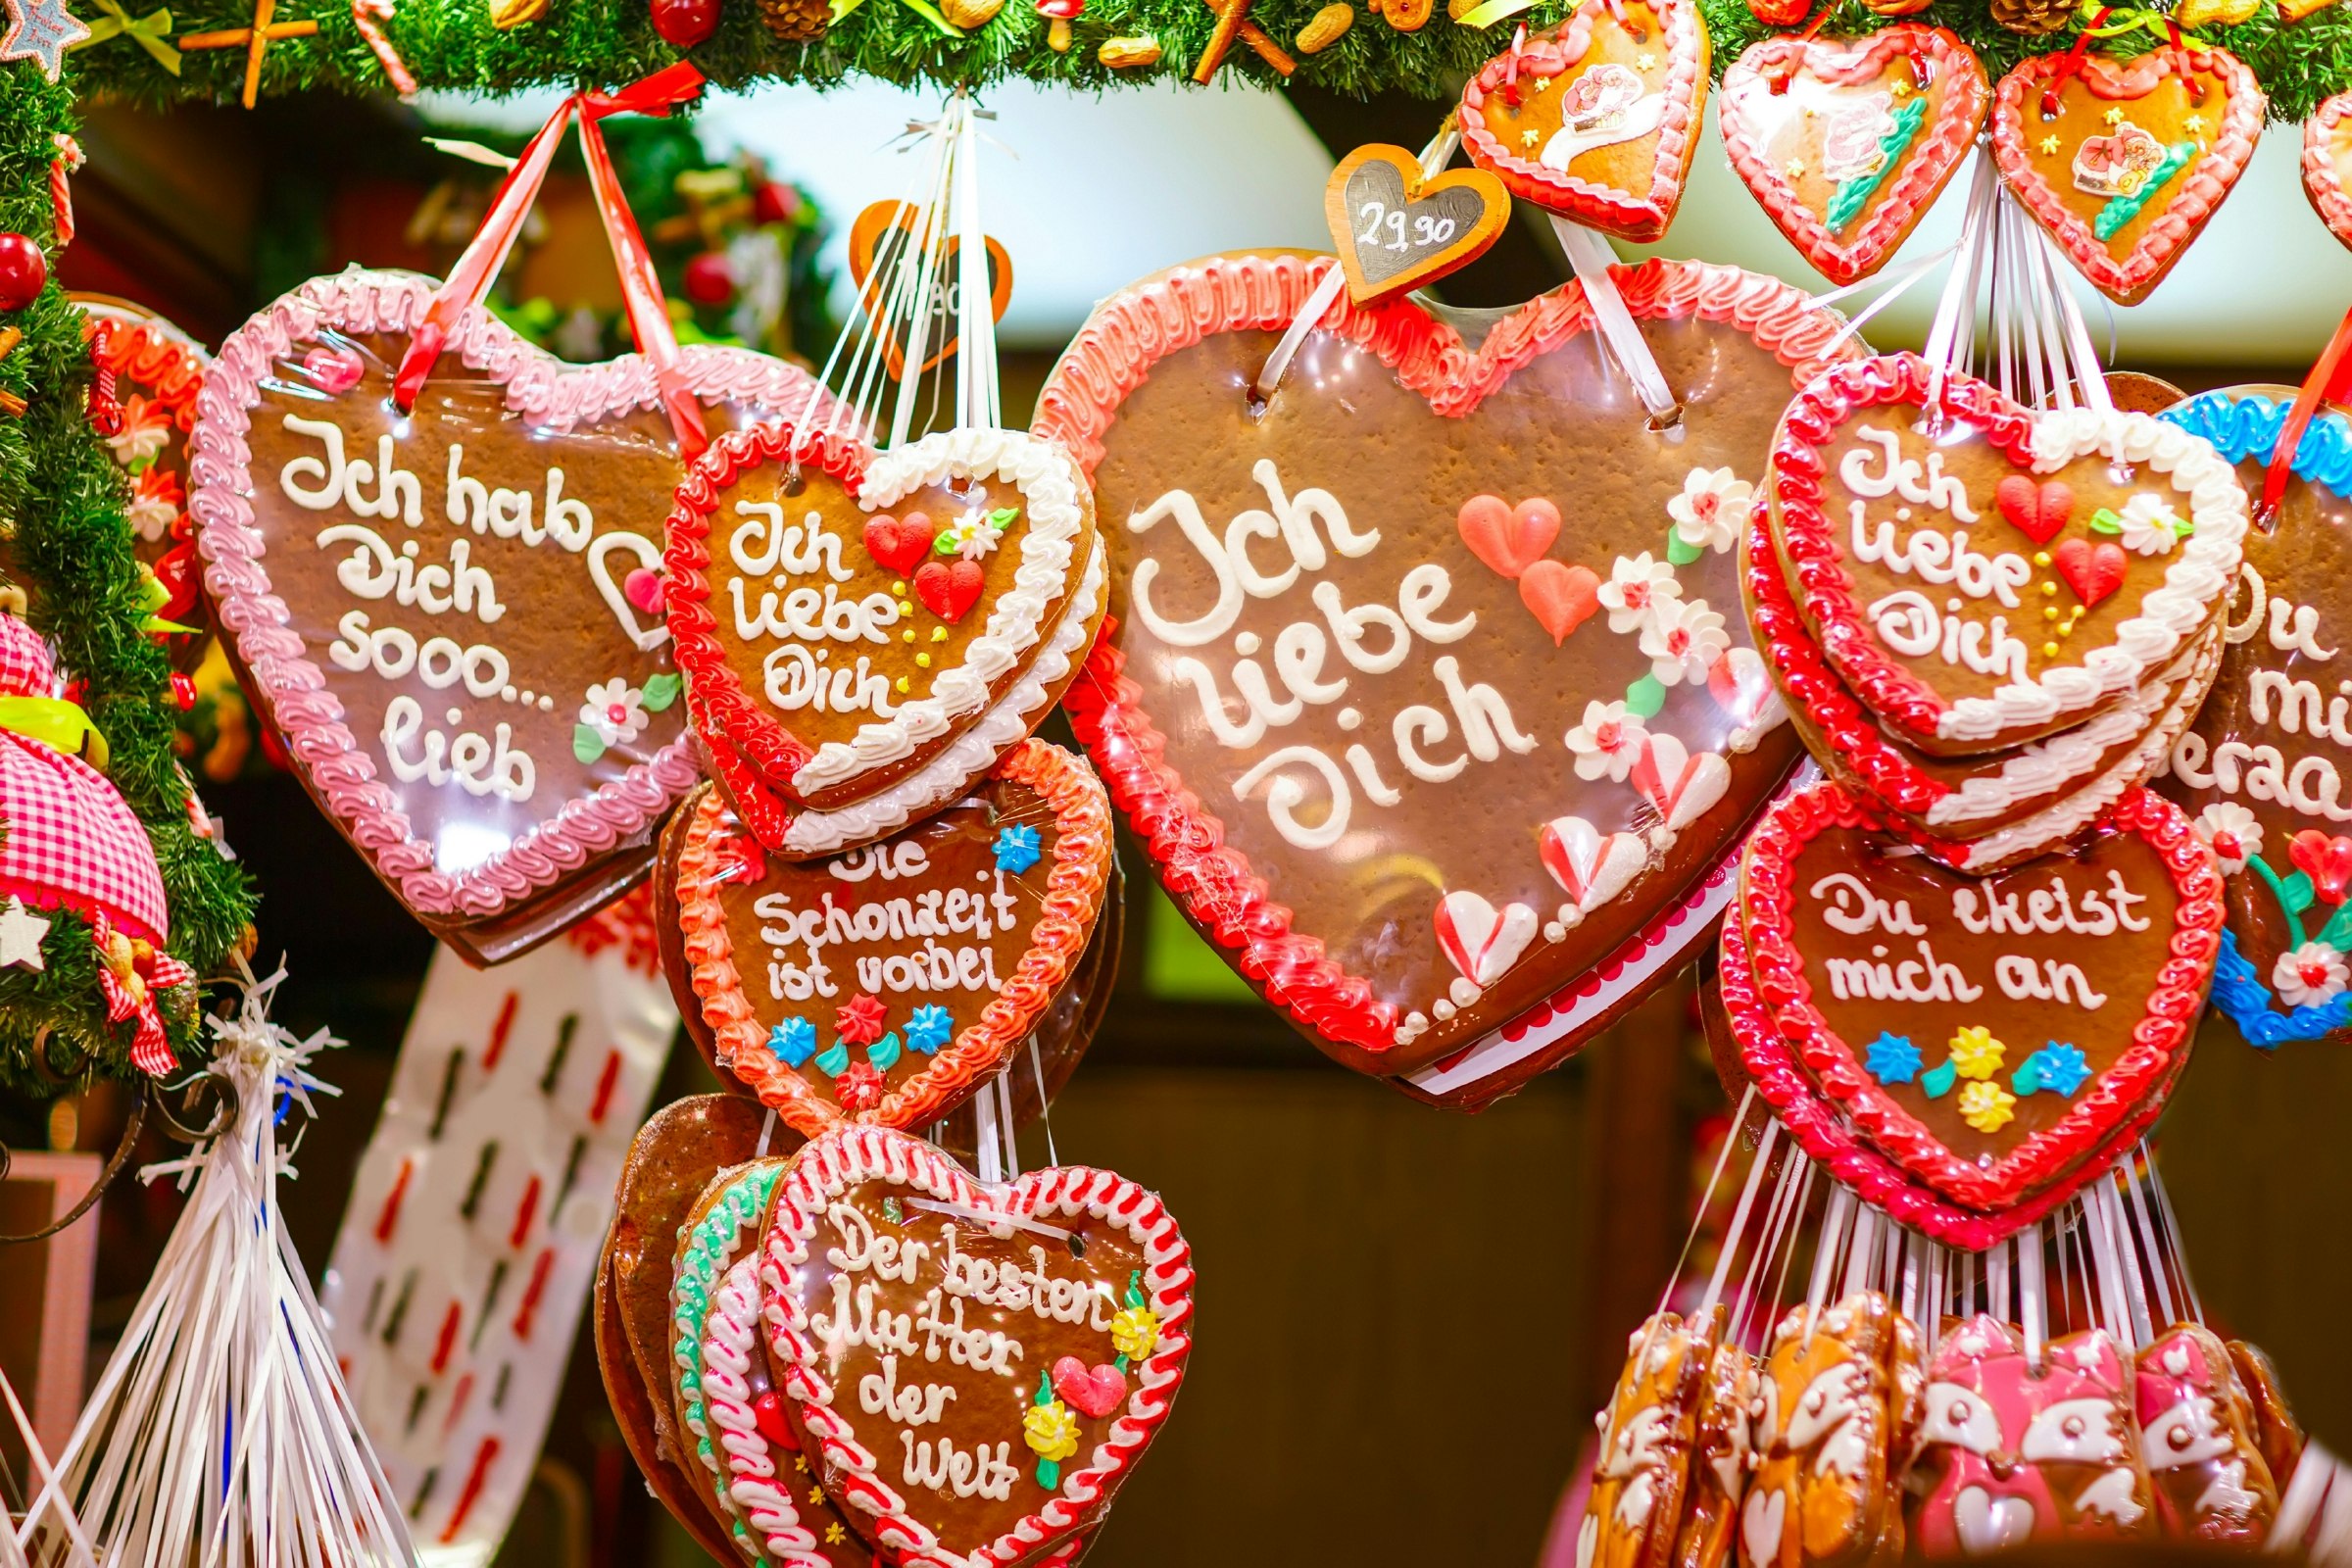 Hearts made of traditional gingerbread hang in the markets, with 'I love you' written in German.